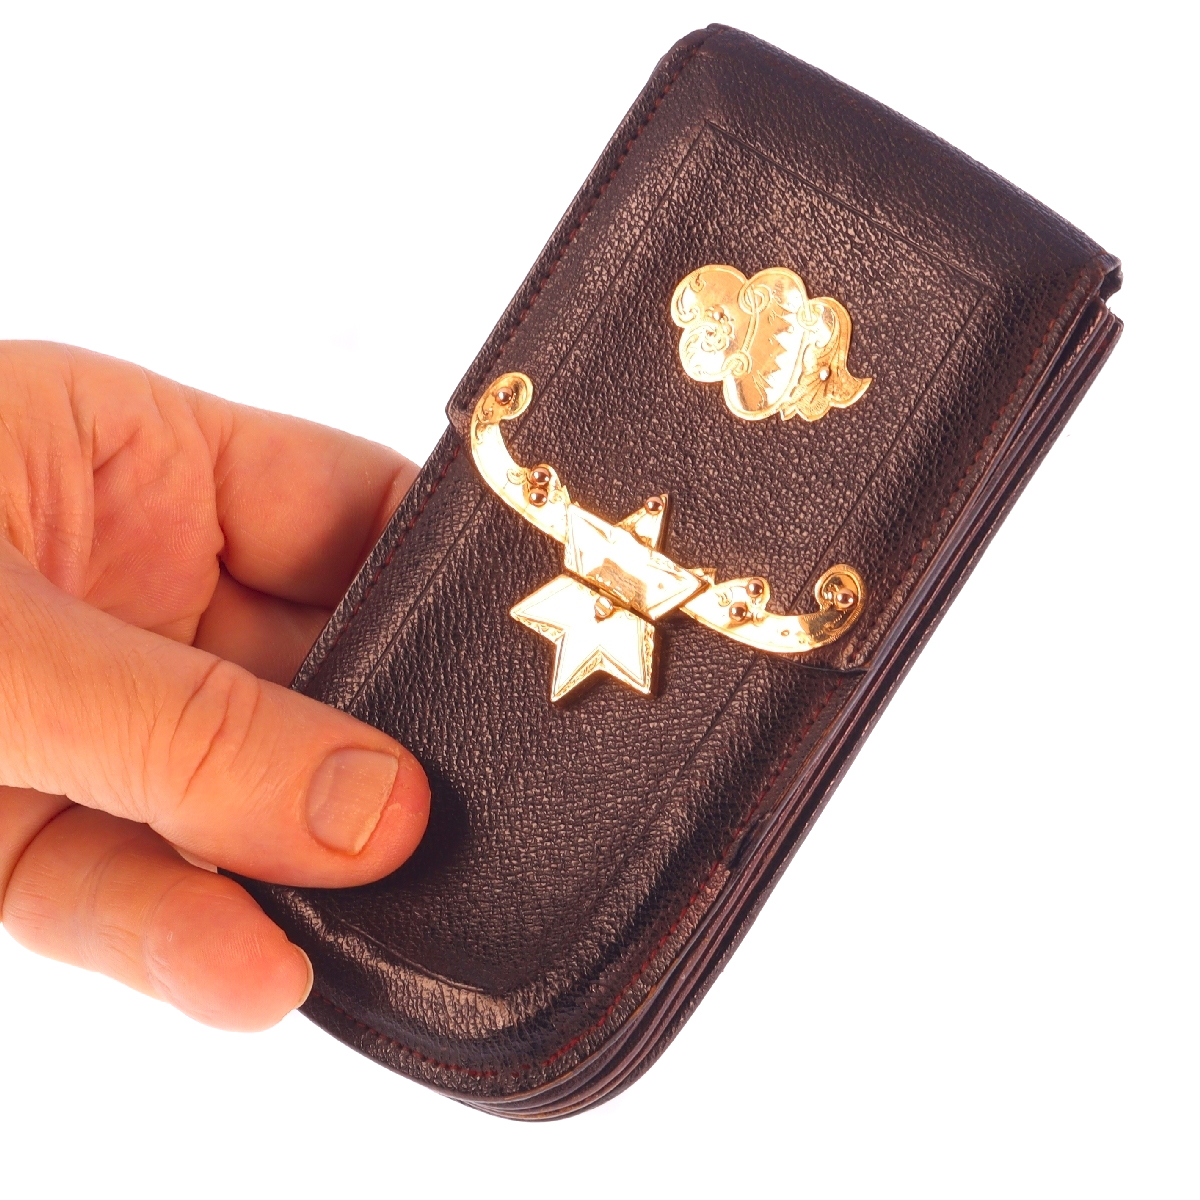 Dutch antique leather wallet with gold fittings and star motif